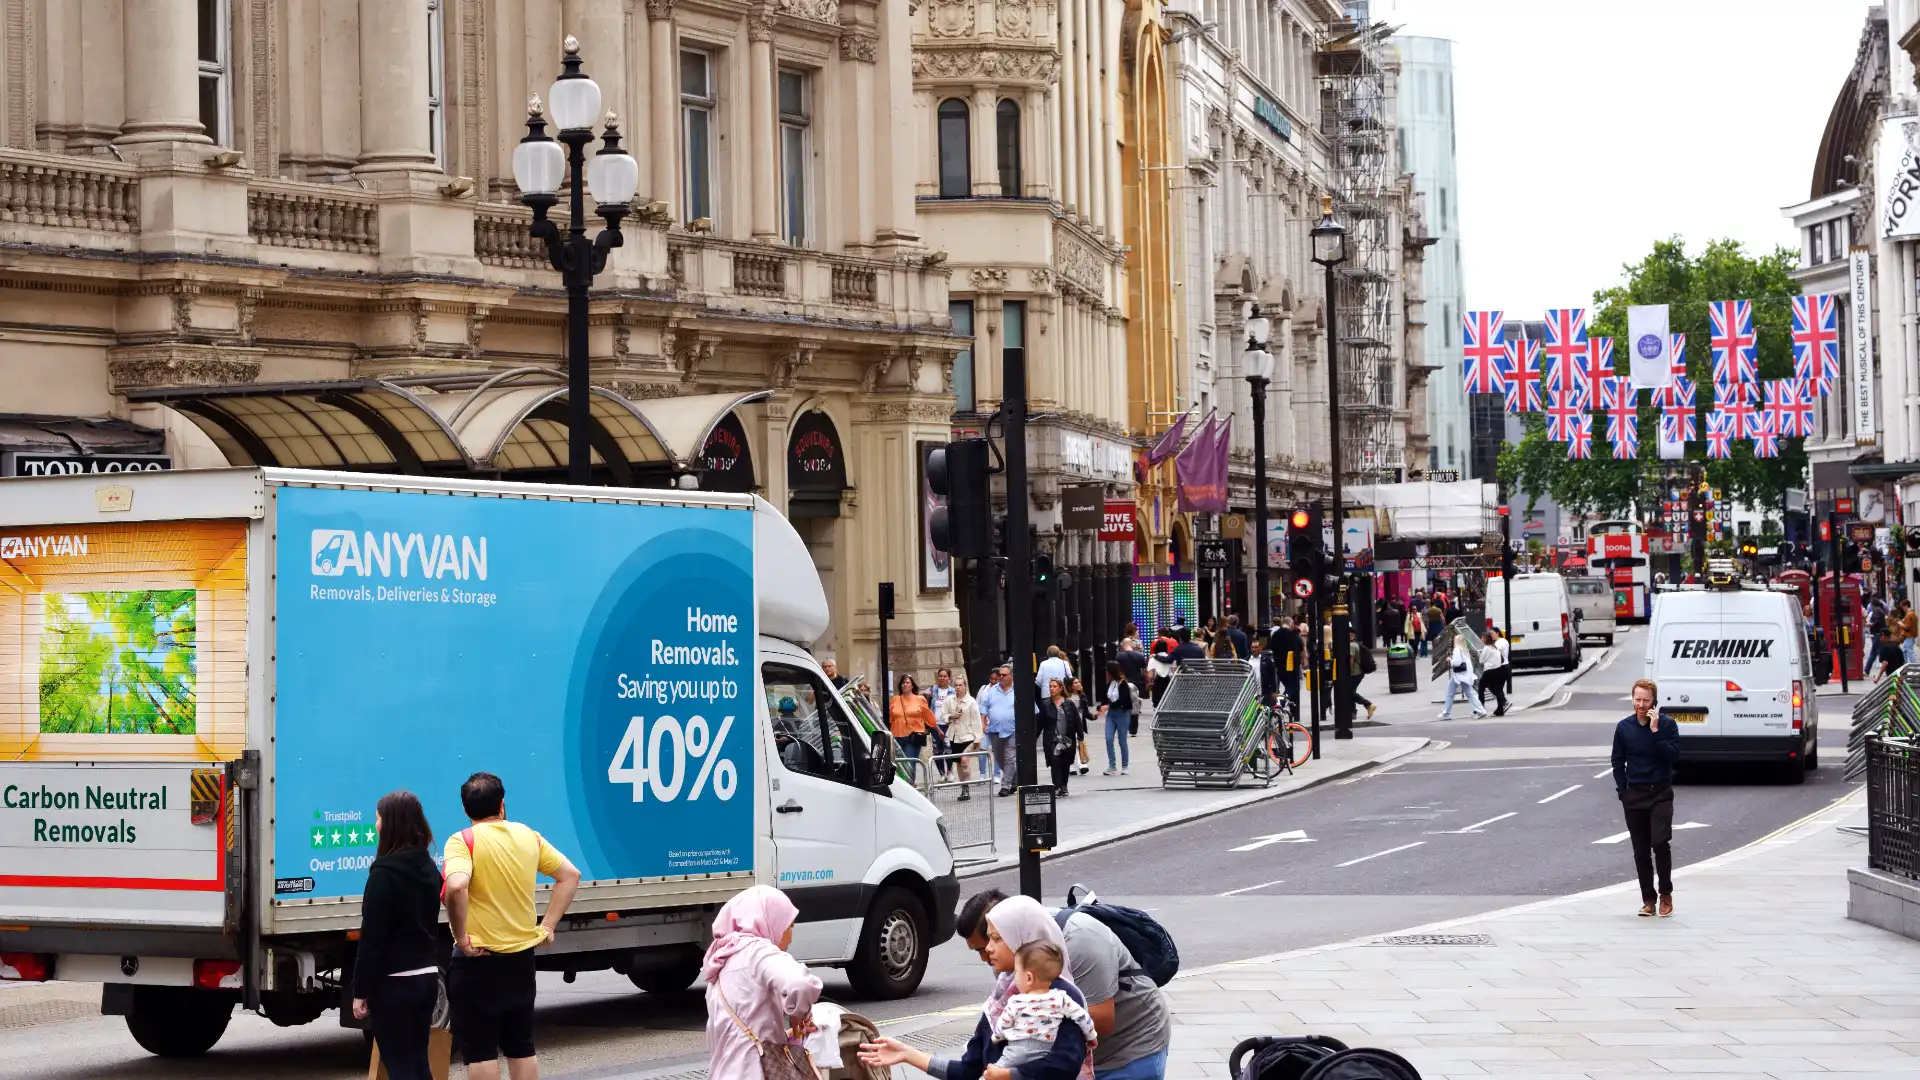 AnyVan in the centre of London